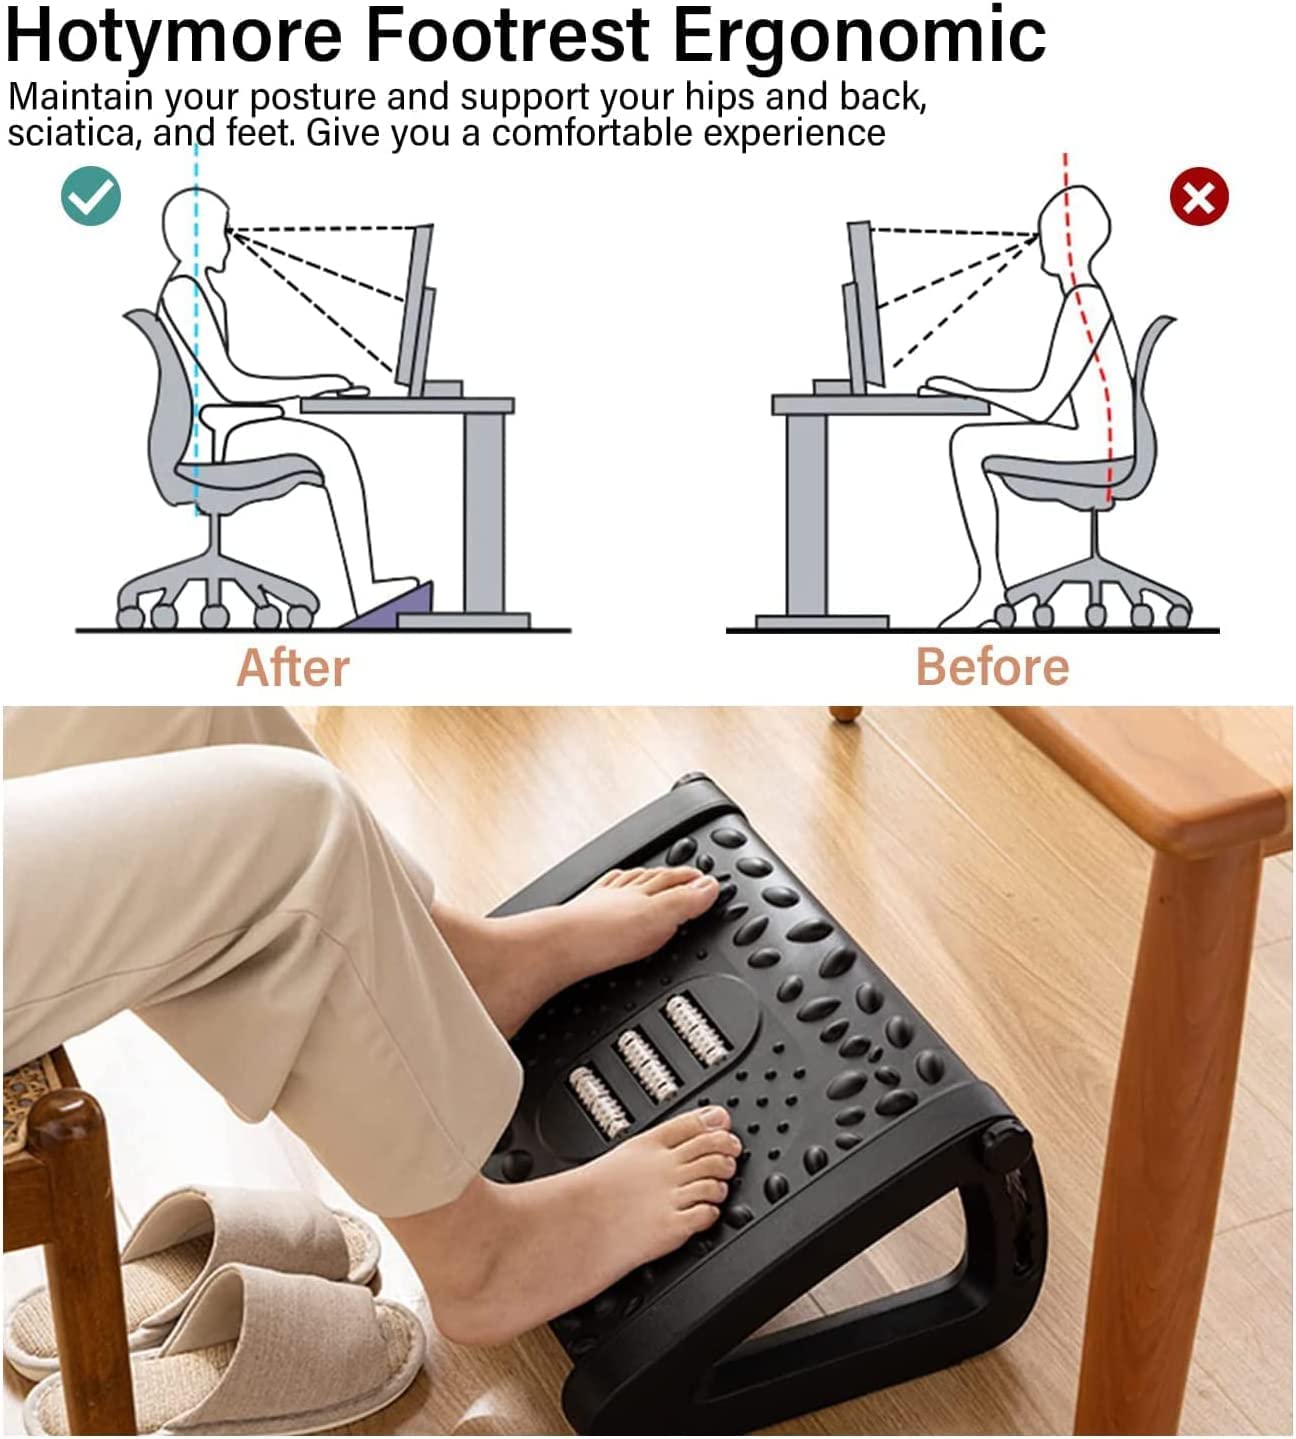 A person using an adjustable footrest designed for home office use